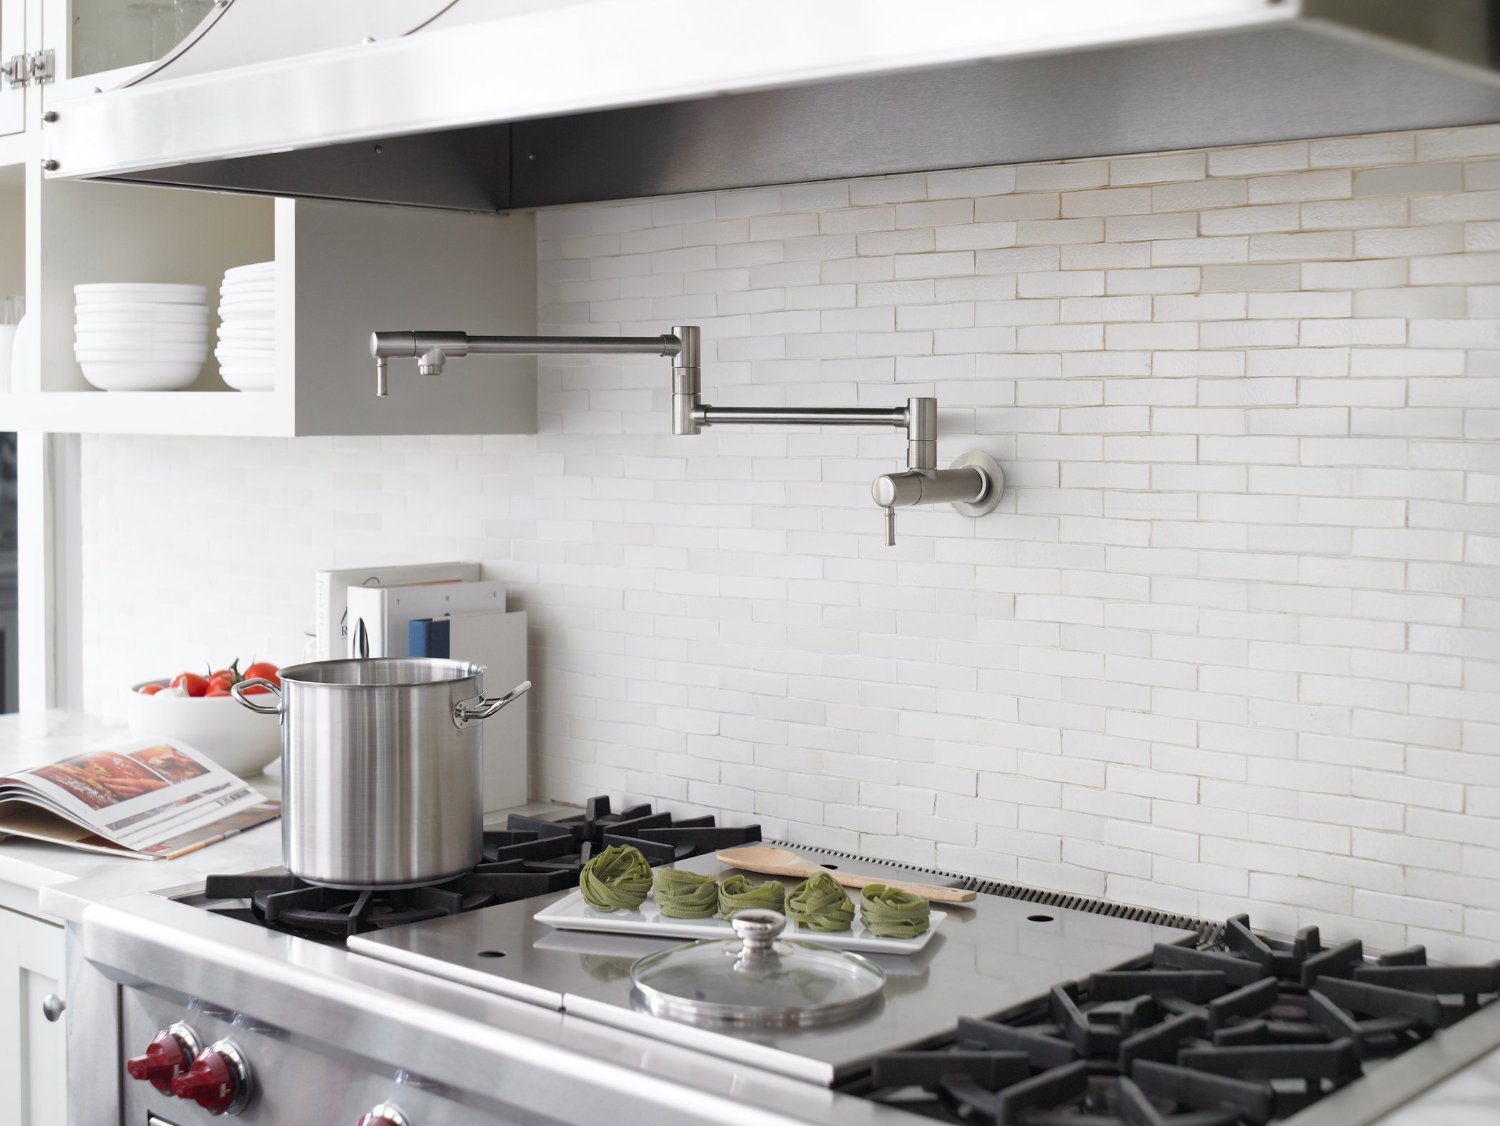 18 Benefits of Having a Pot Filler in Your Kitchen